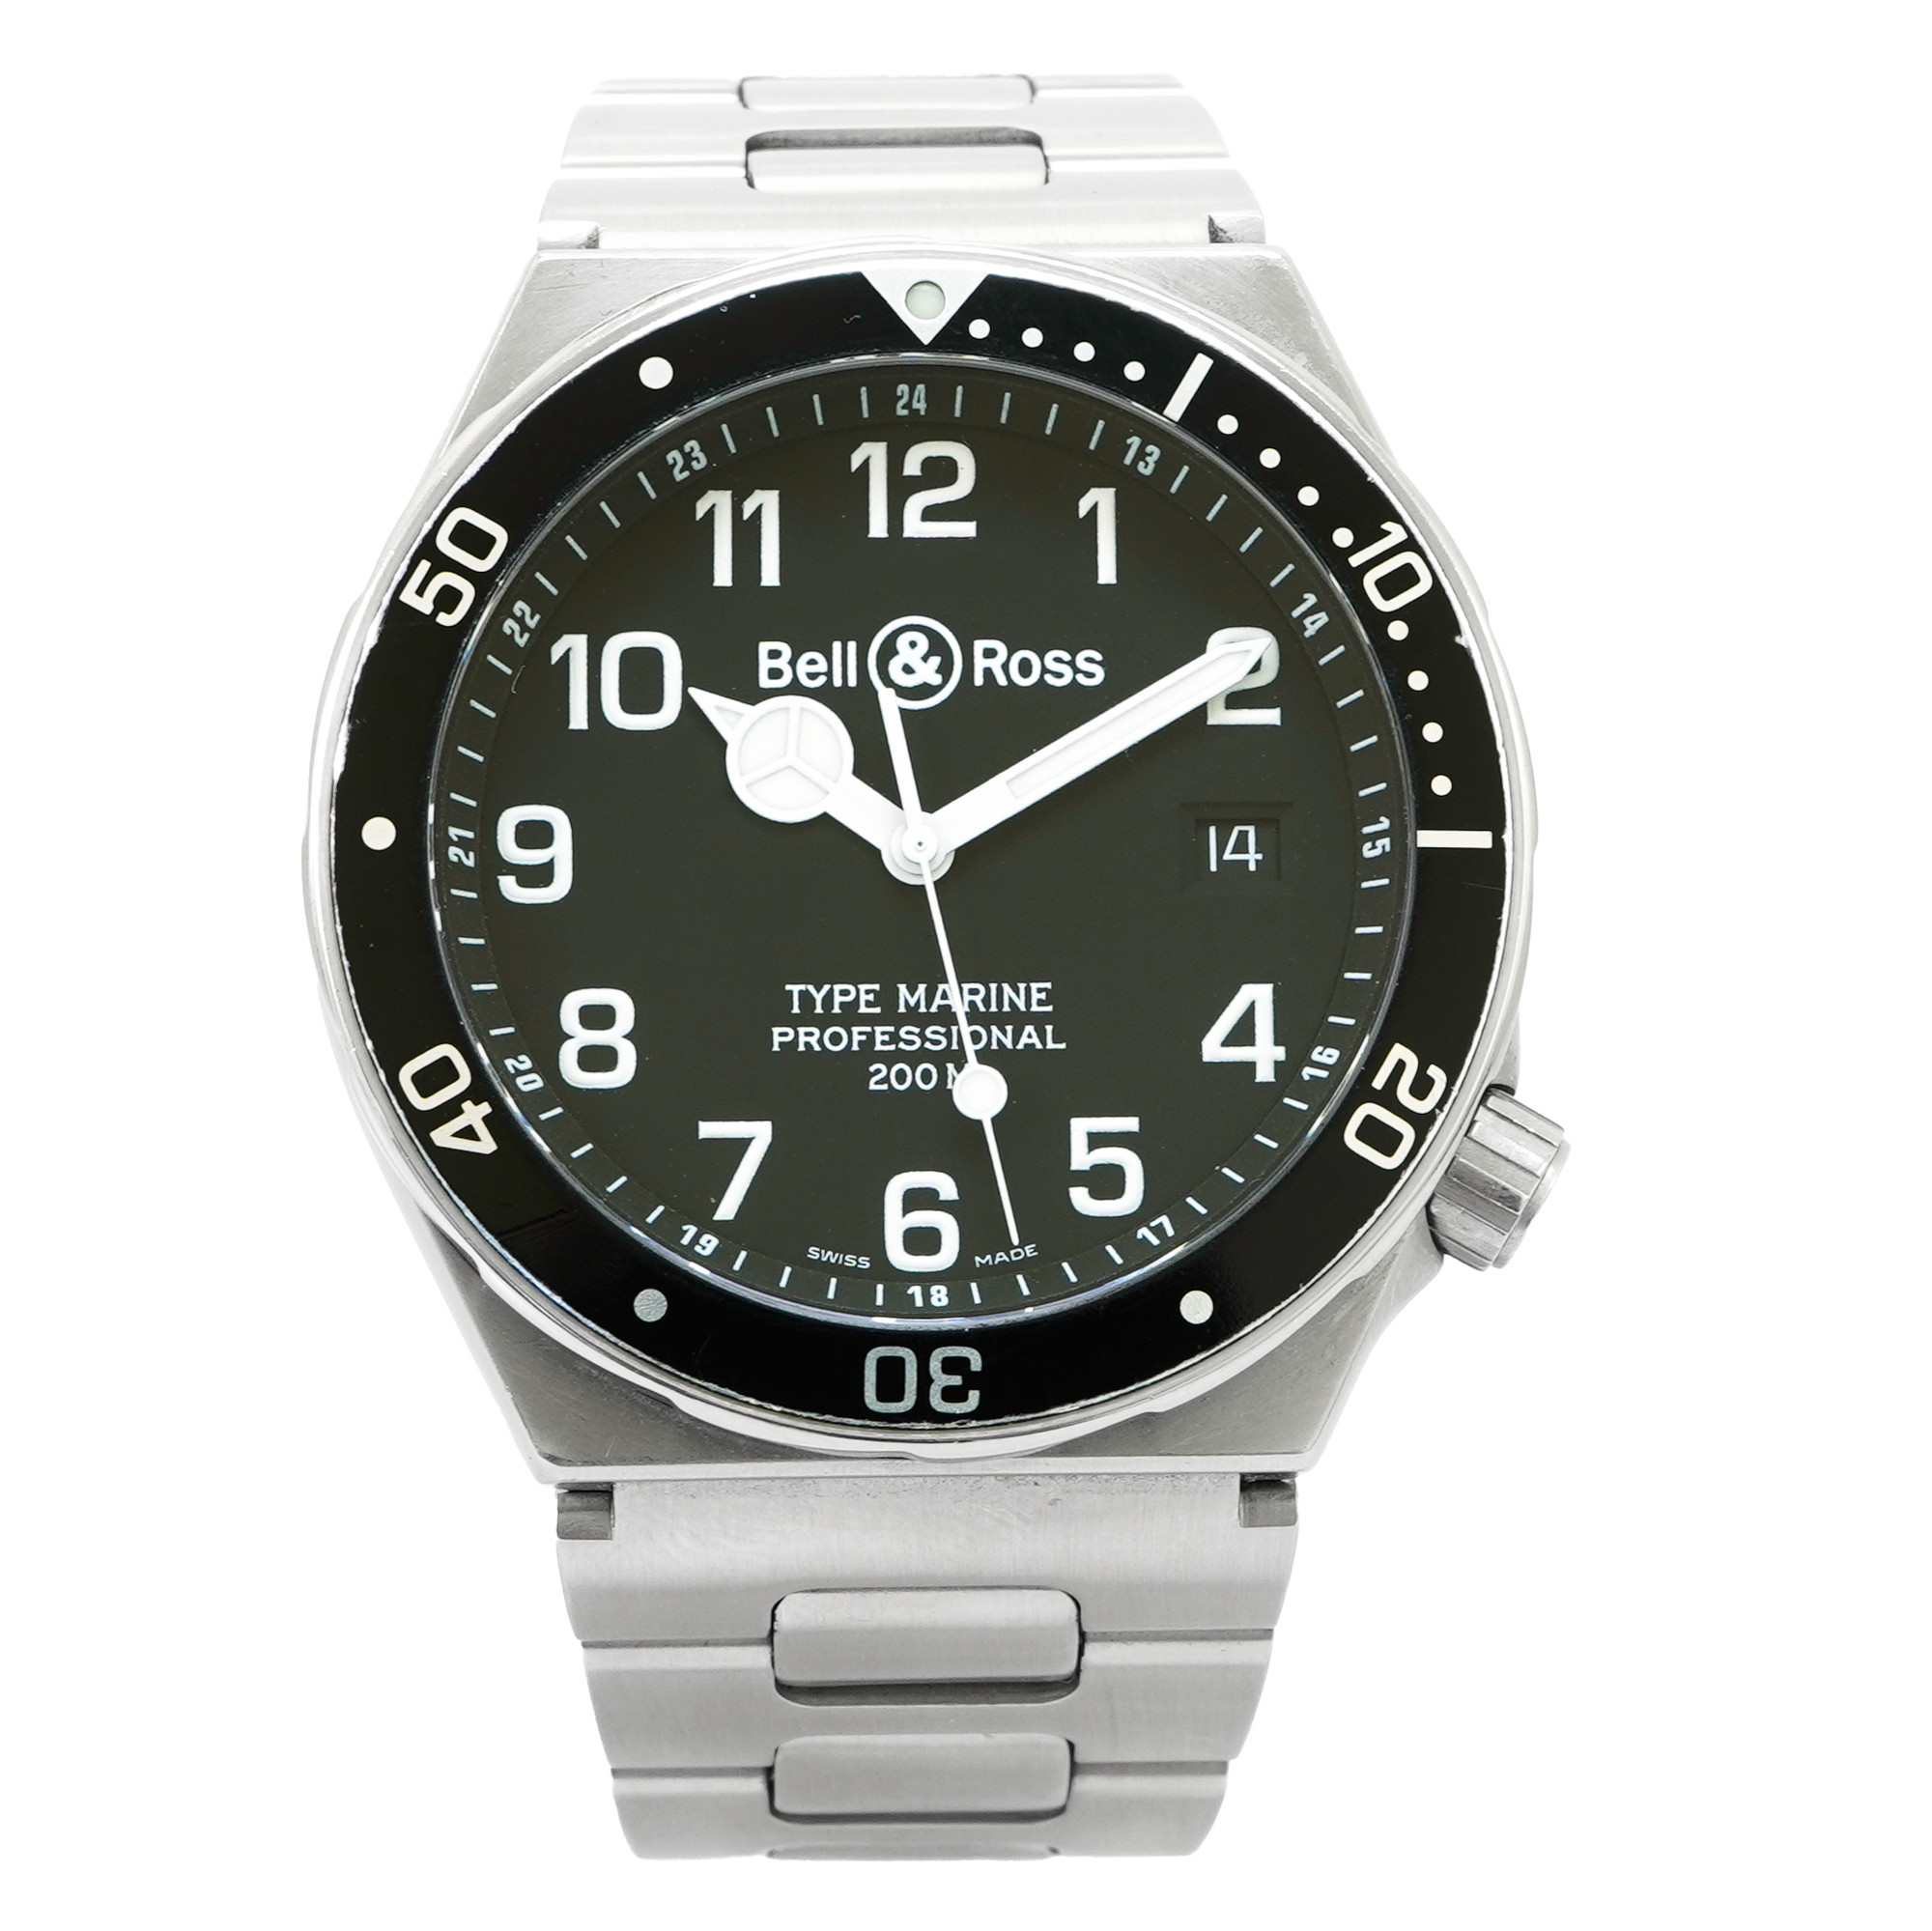 Bell & Ross Type Marine Professional 200M - Inventory 5470